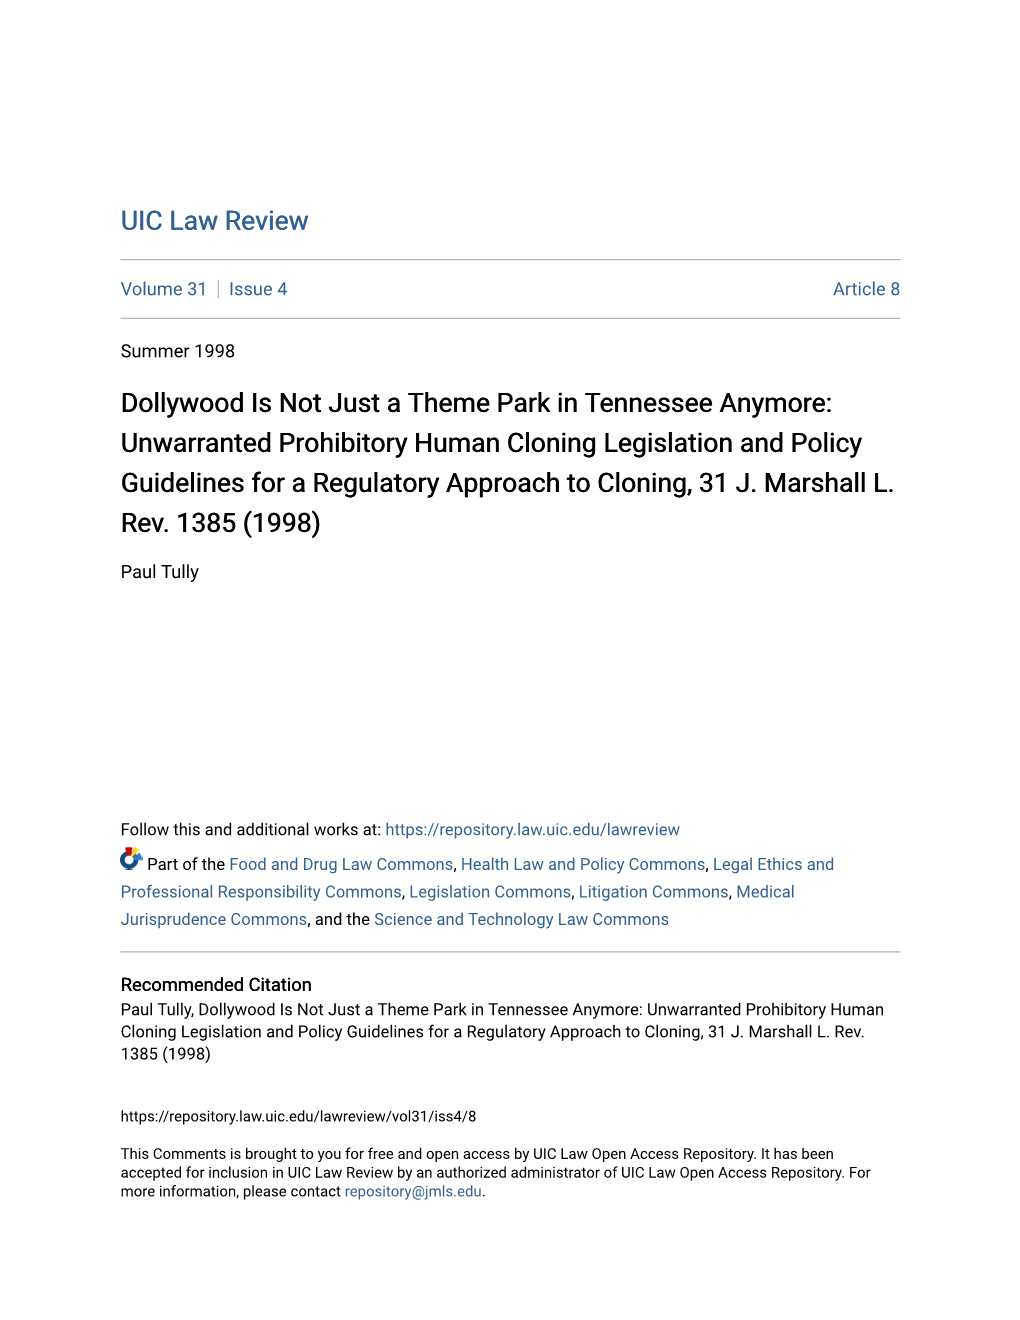 Unwarranted Prohibitory Human Cloning Legislation and Policy Guidelines for a Regulatory Approach to Cloning, 31 J